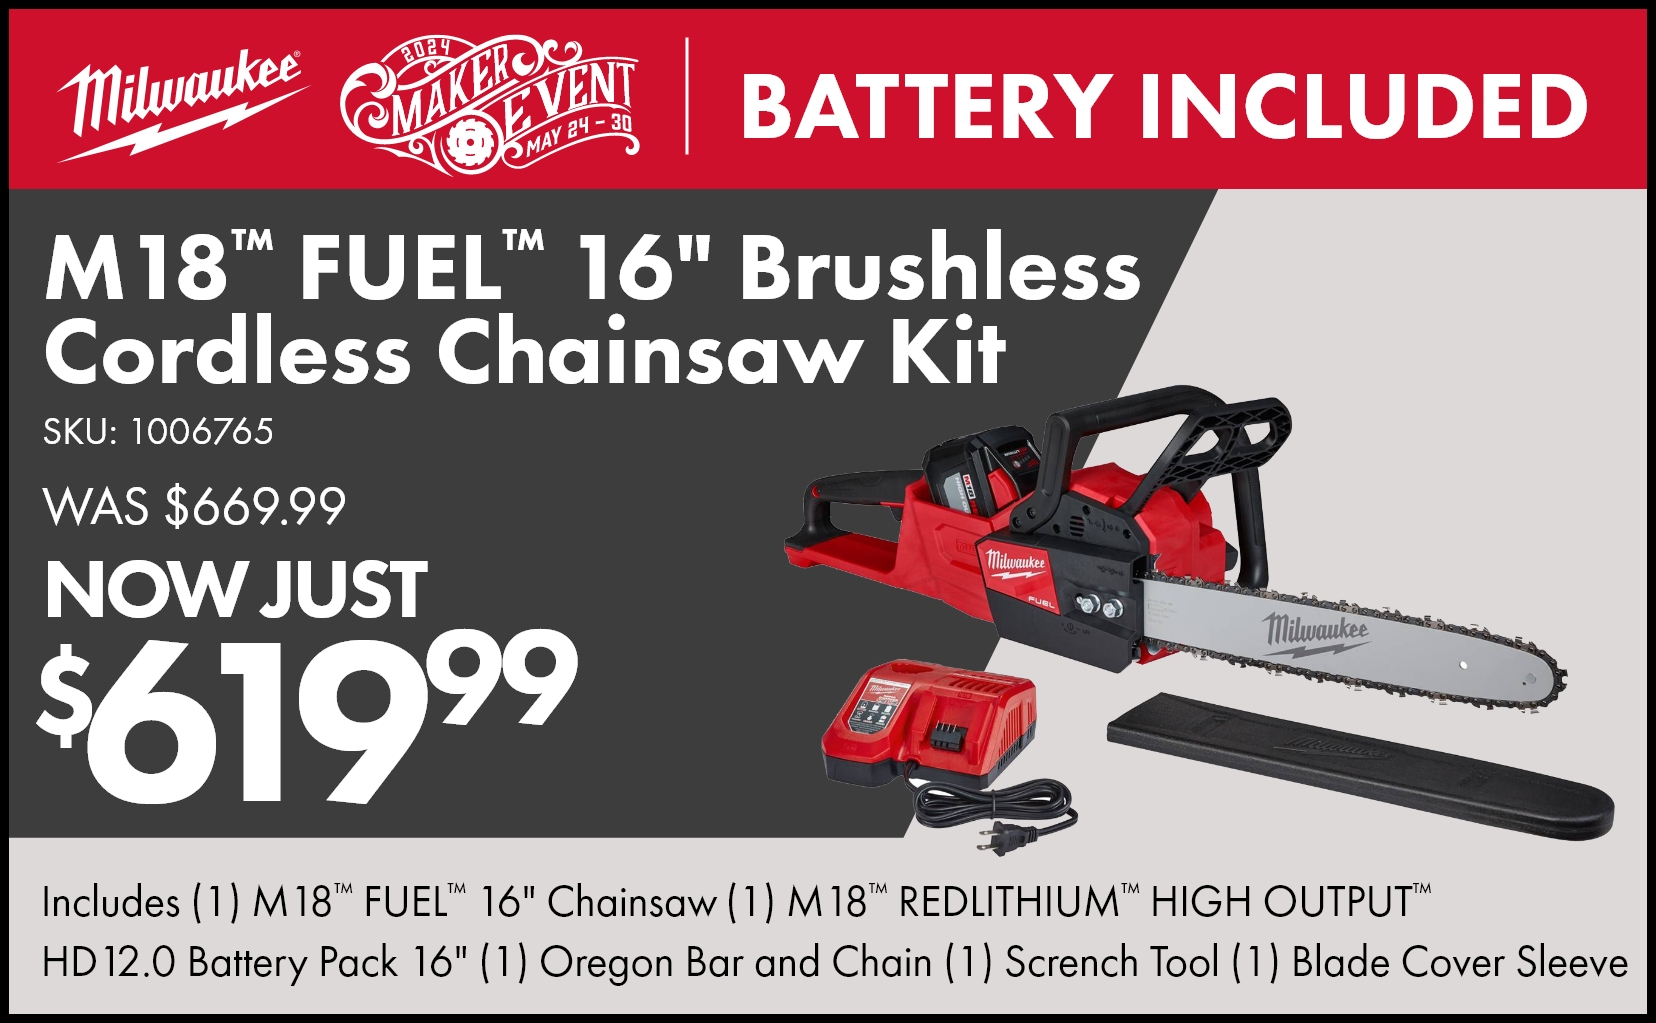 Shop the Milwaukee® M18 FUEL™ 16" Brushless Cordless Chainsaw Kit